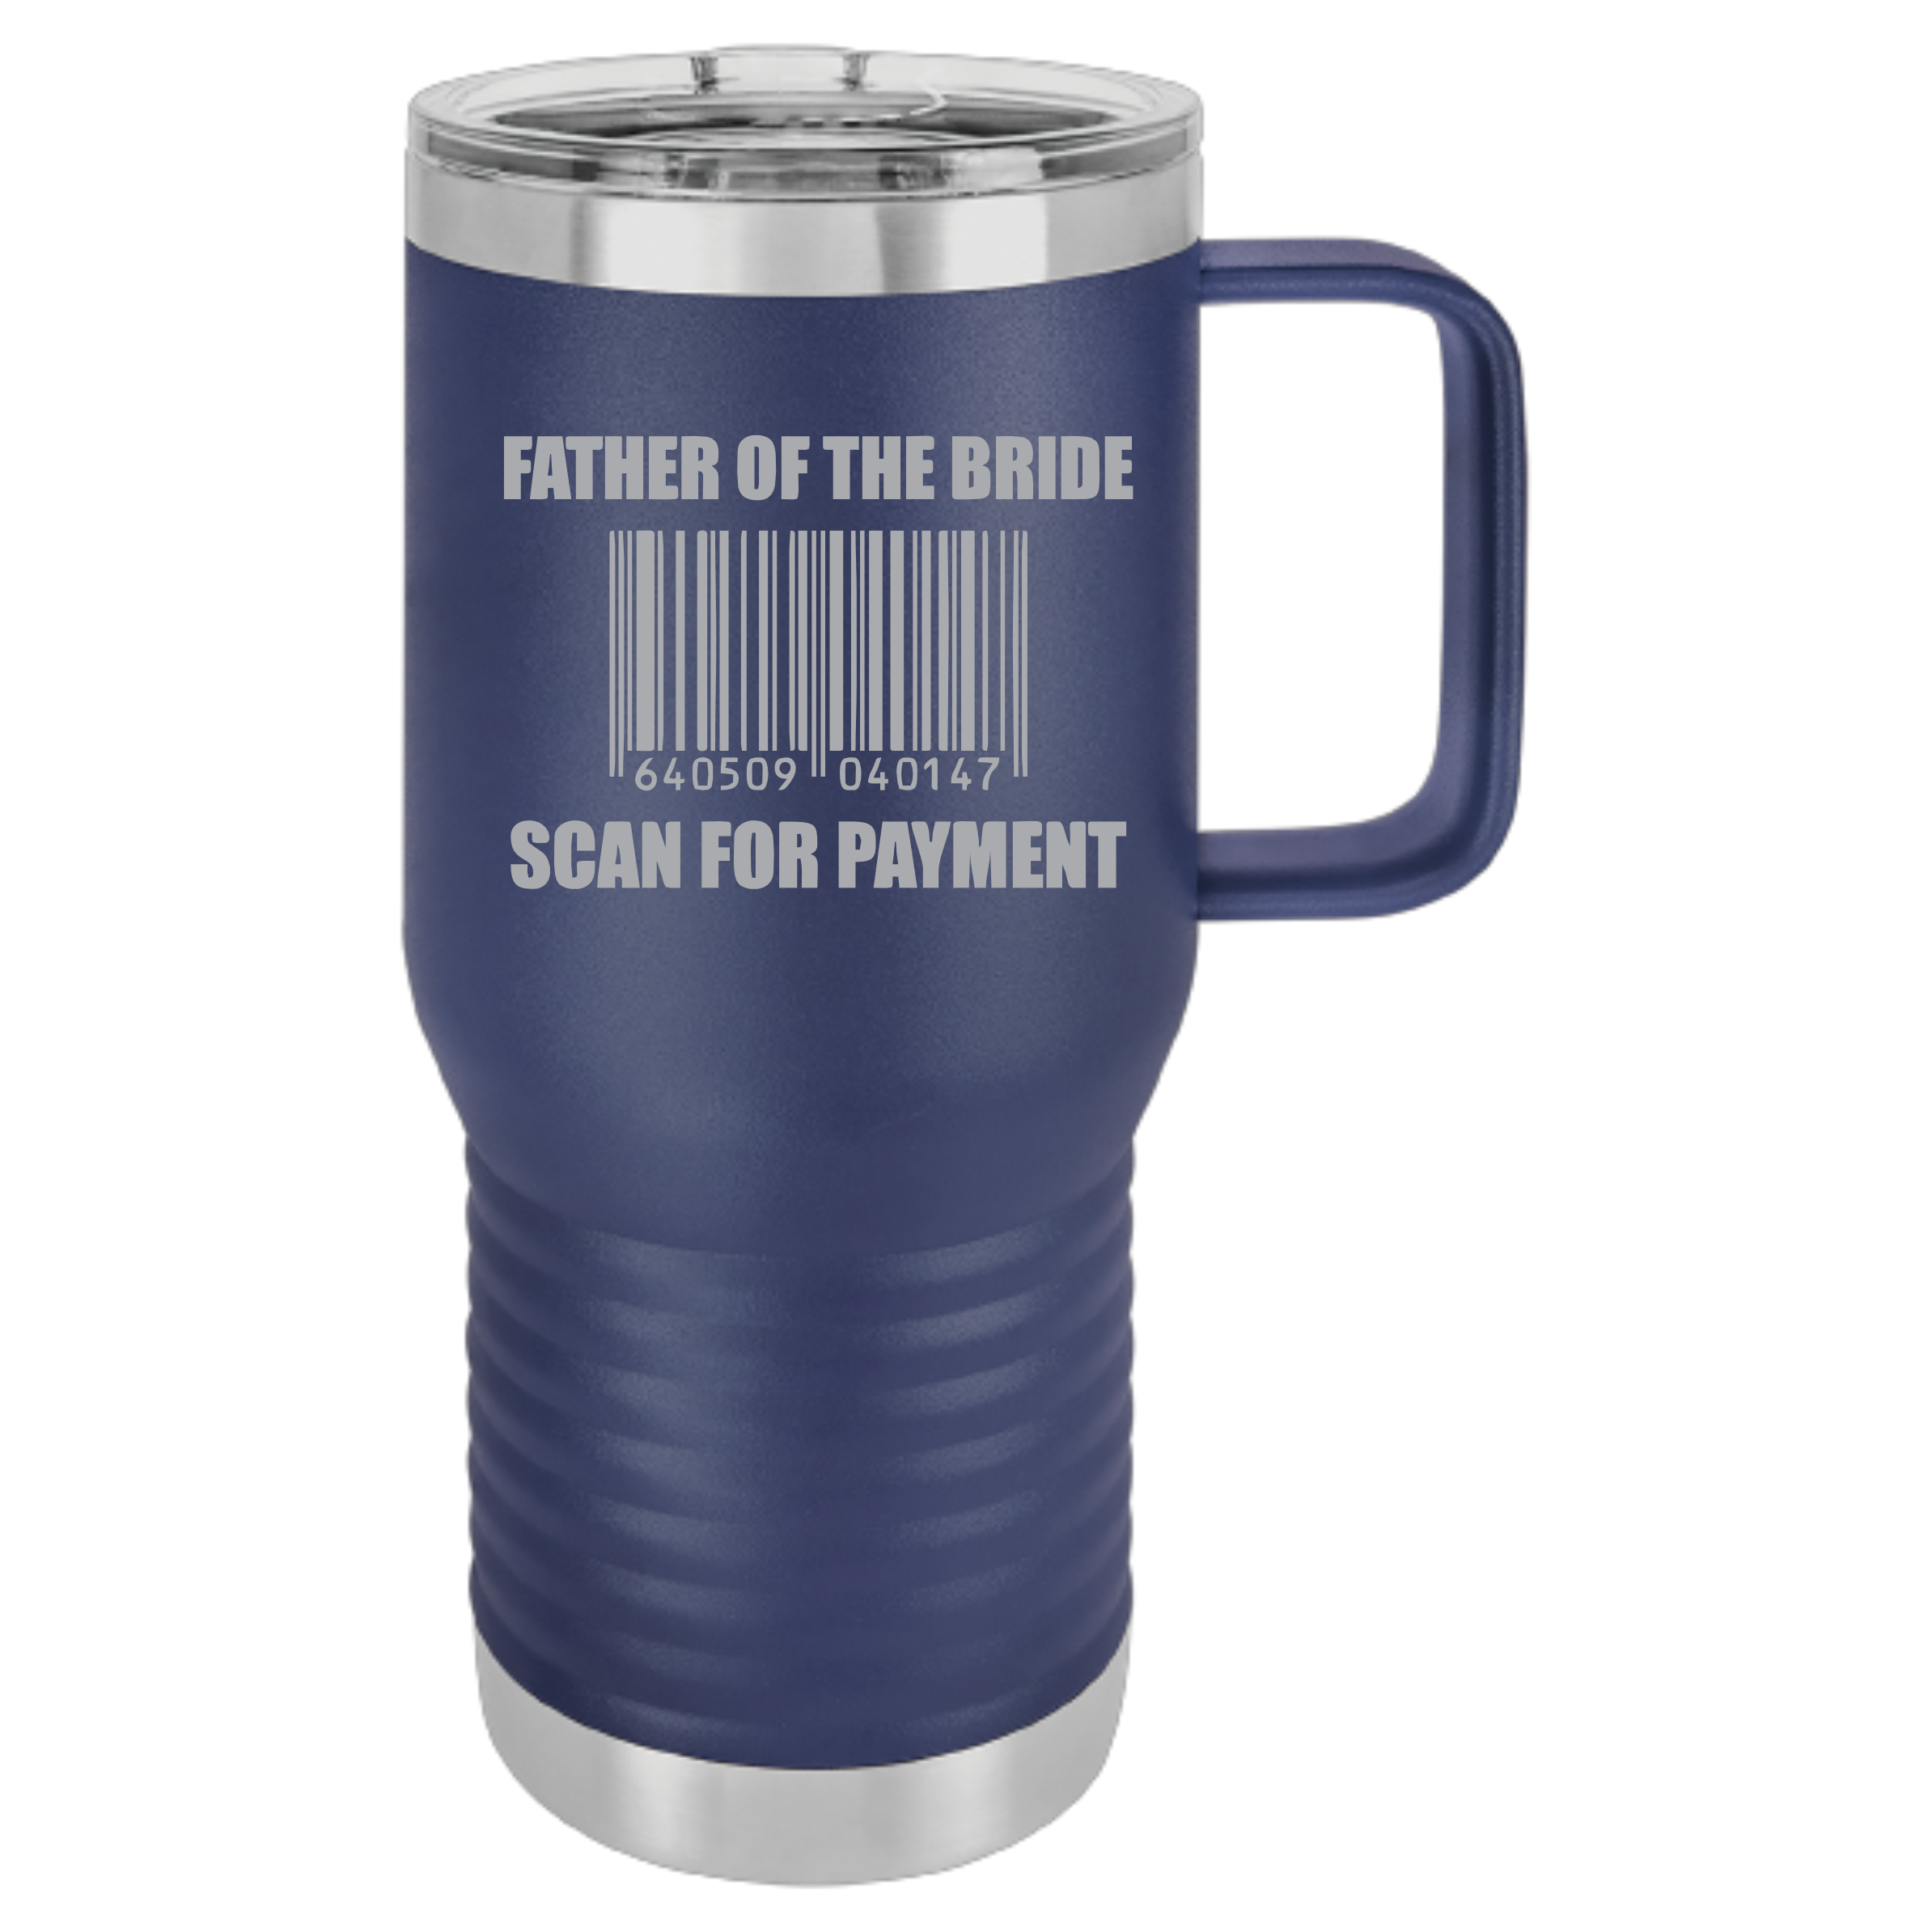 20oz. Father of the Bride Scan for Payment Tumbler -Laser Engraved